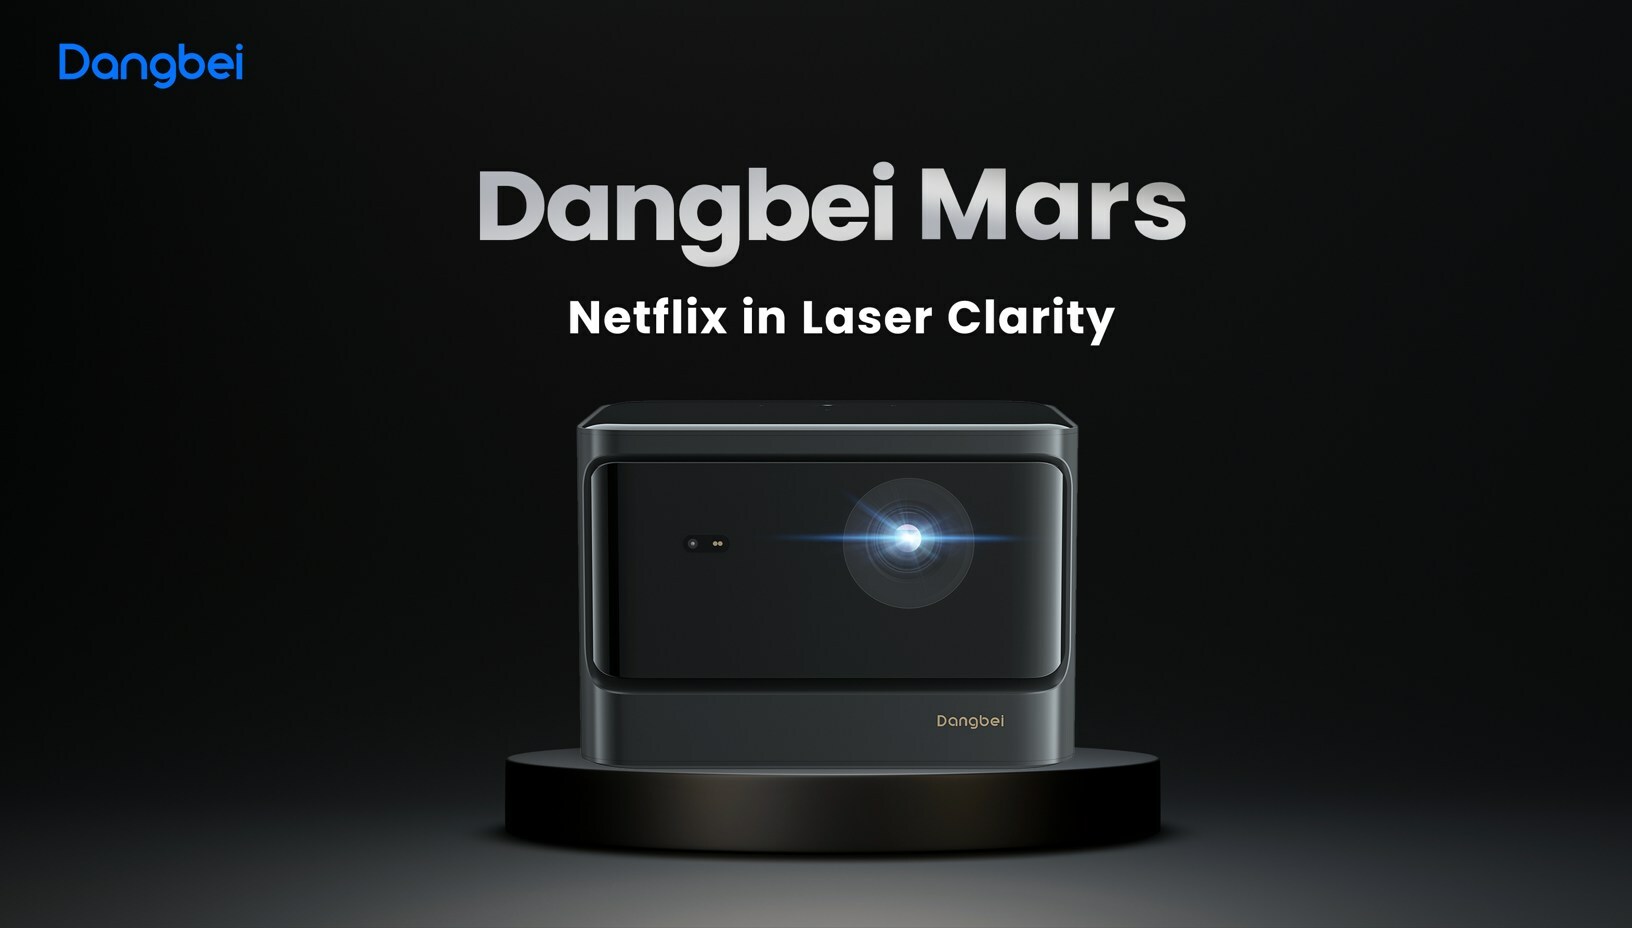 Dangbei launches its Mars Laser Projector, with native Netflix and ultra-bright 1080p laser projection